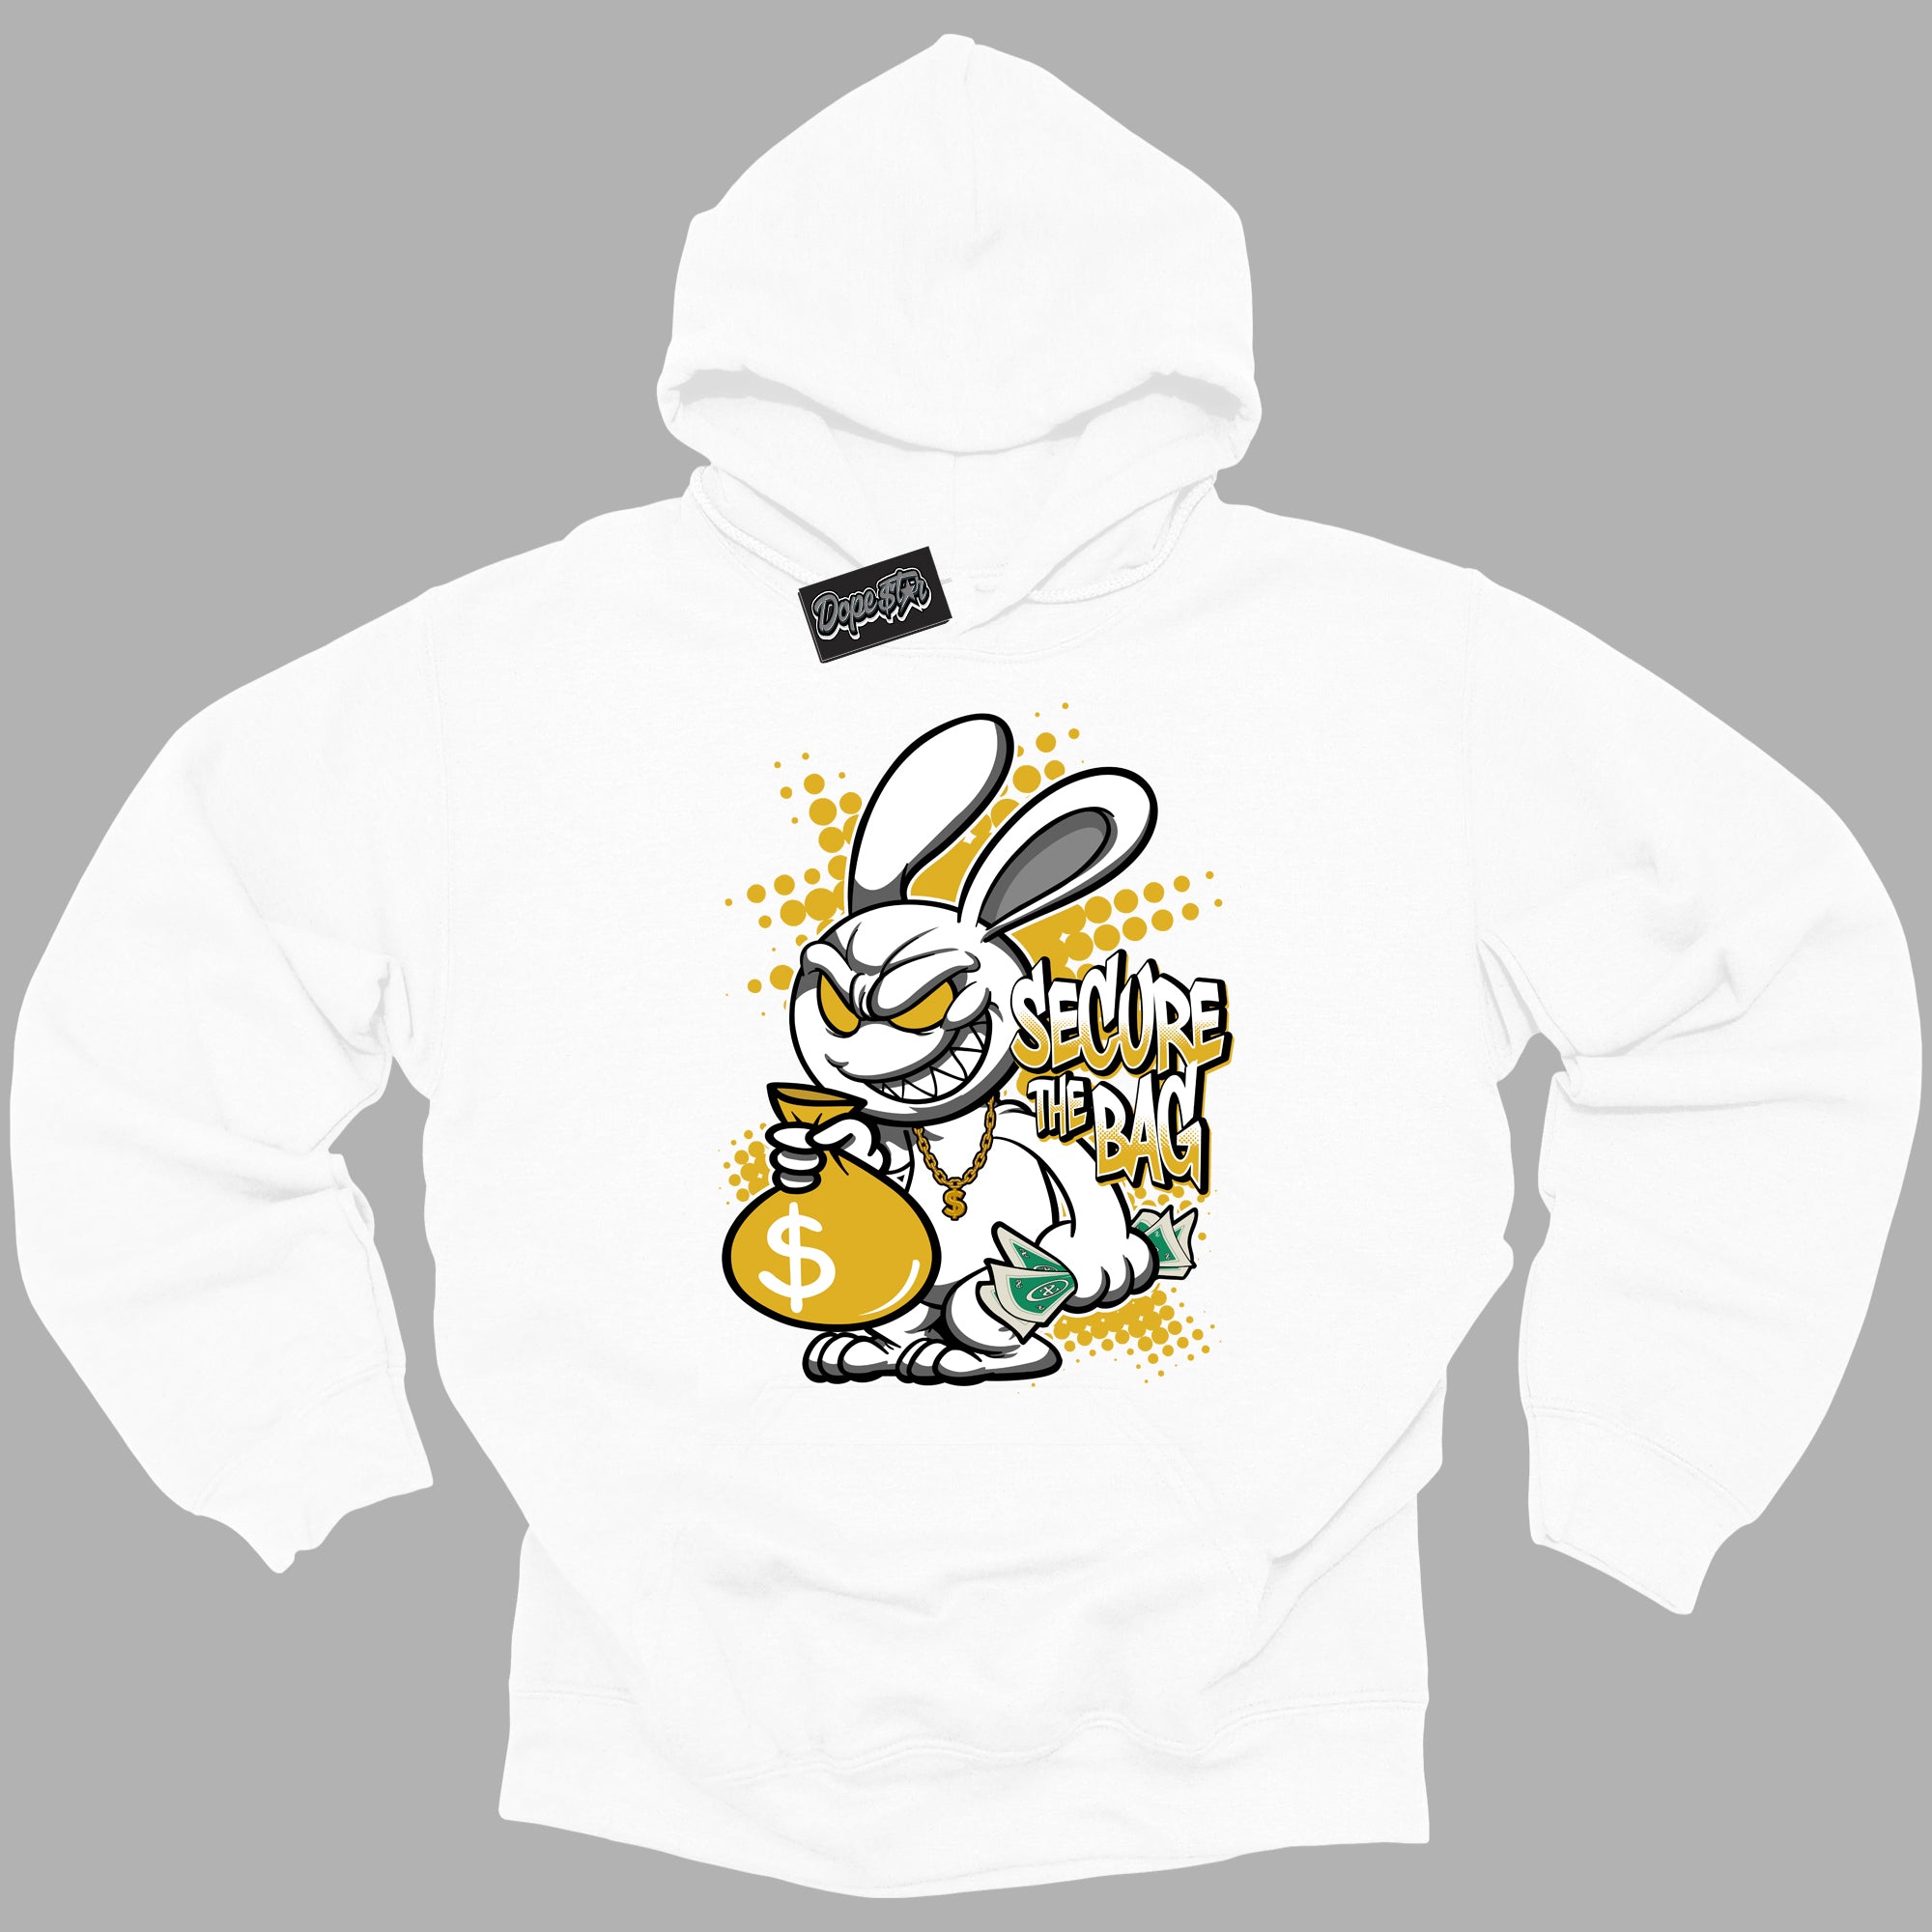 Cool White Hoodie with “ Secure The Bag ”  design that Perfectly Matches Yellow Ochre 6s Sneakers.